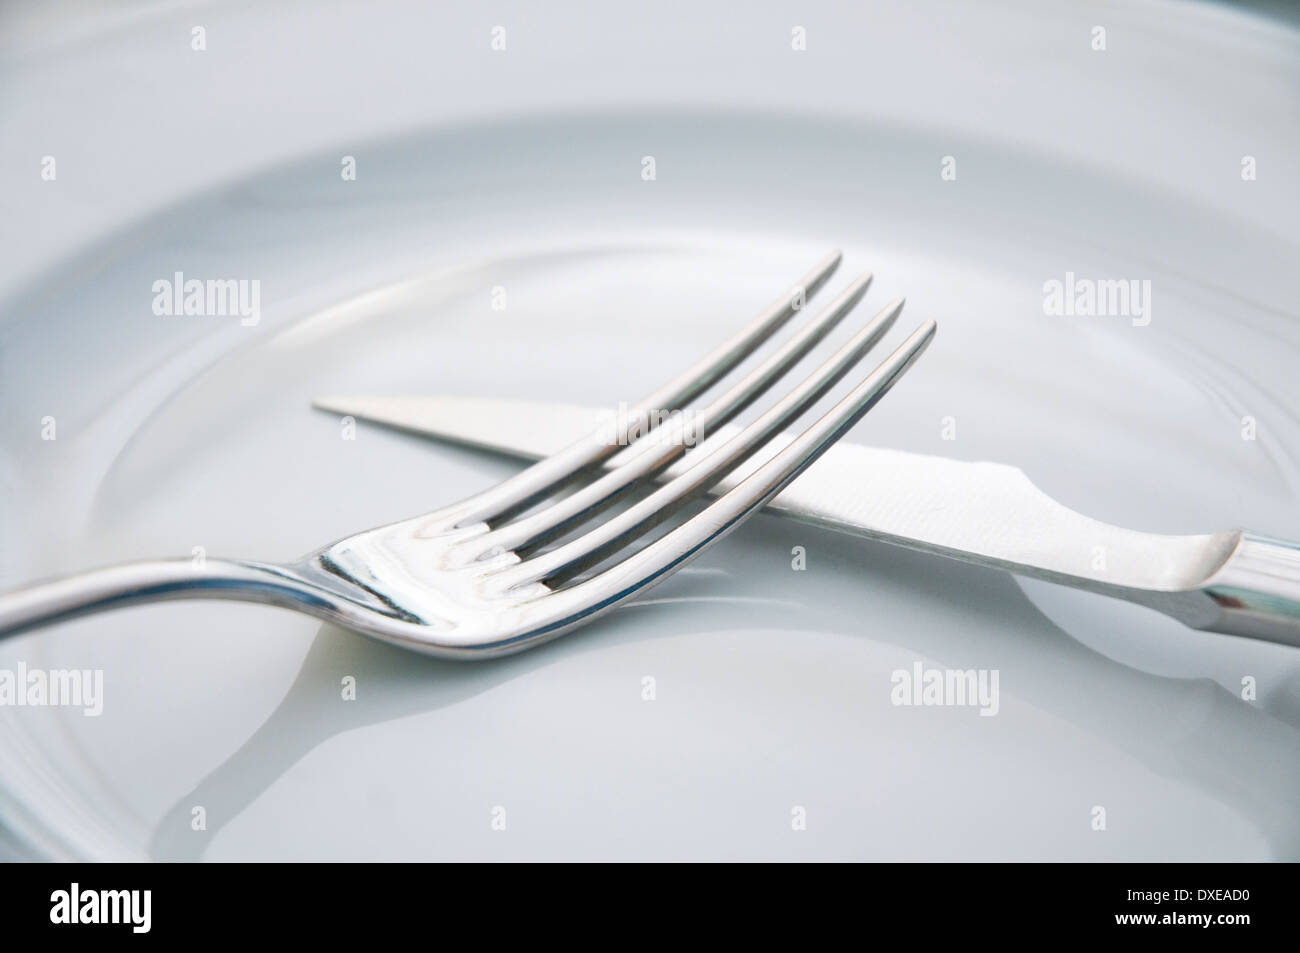 Fork and knife crossing on an empty plate. Close view. Stock Photo